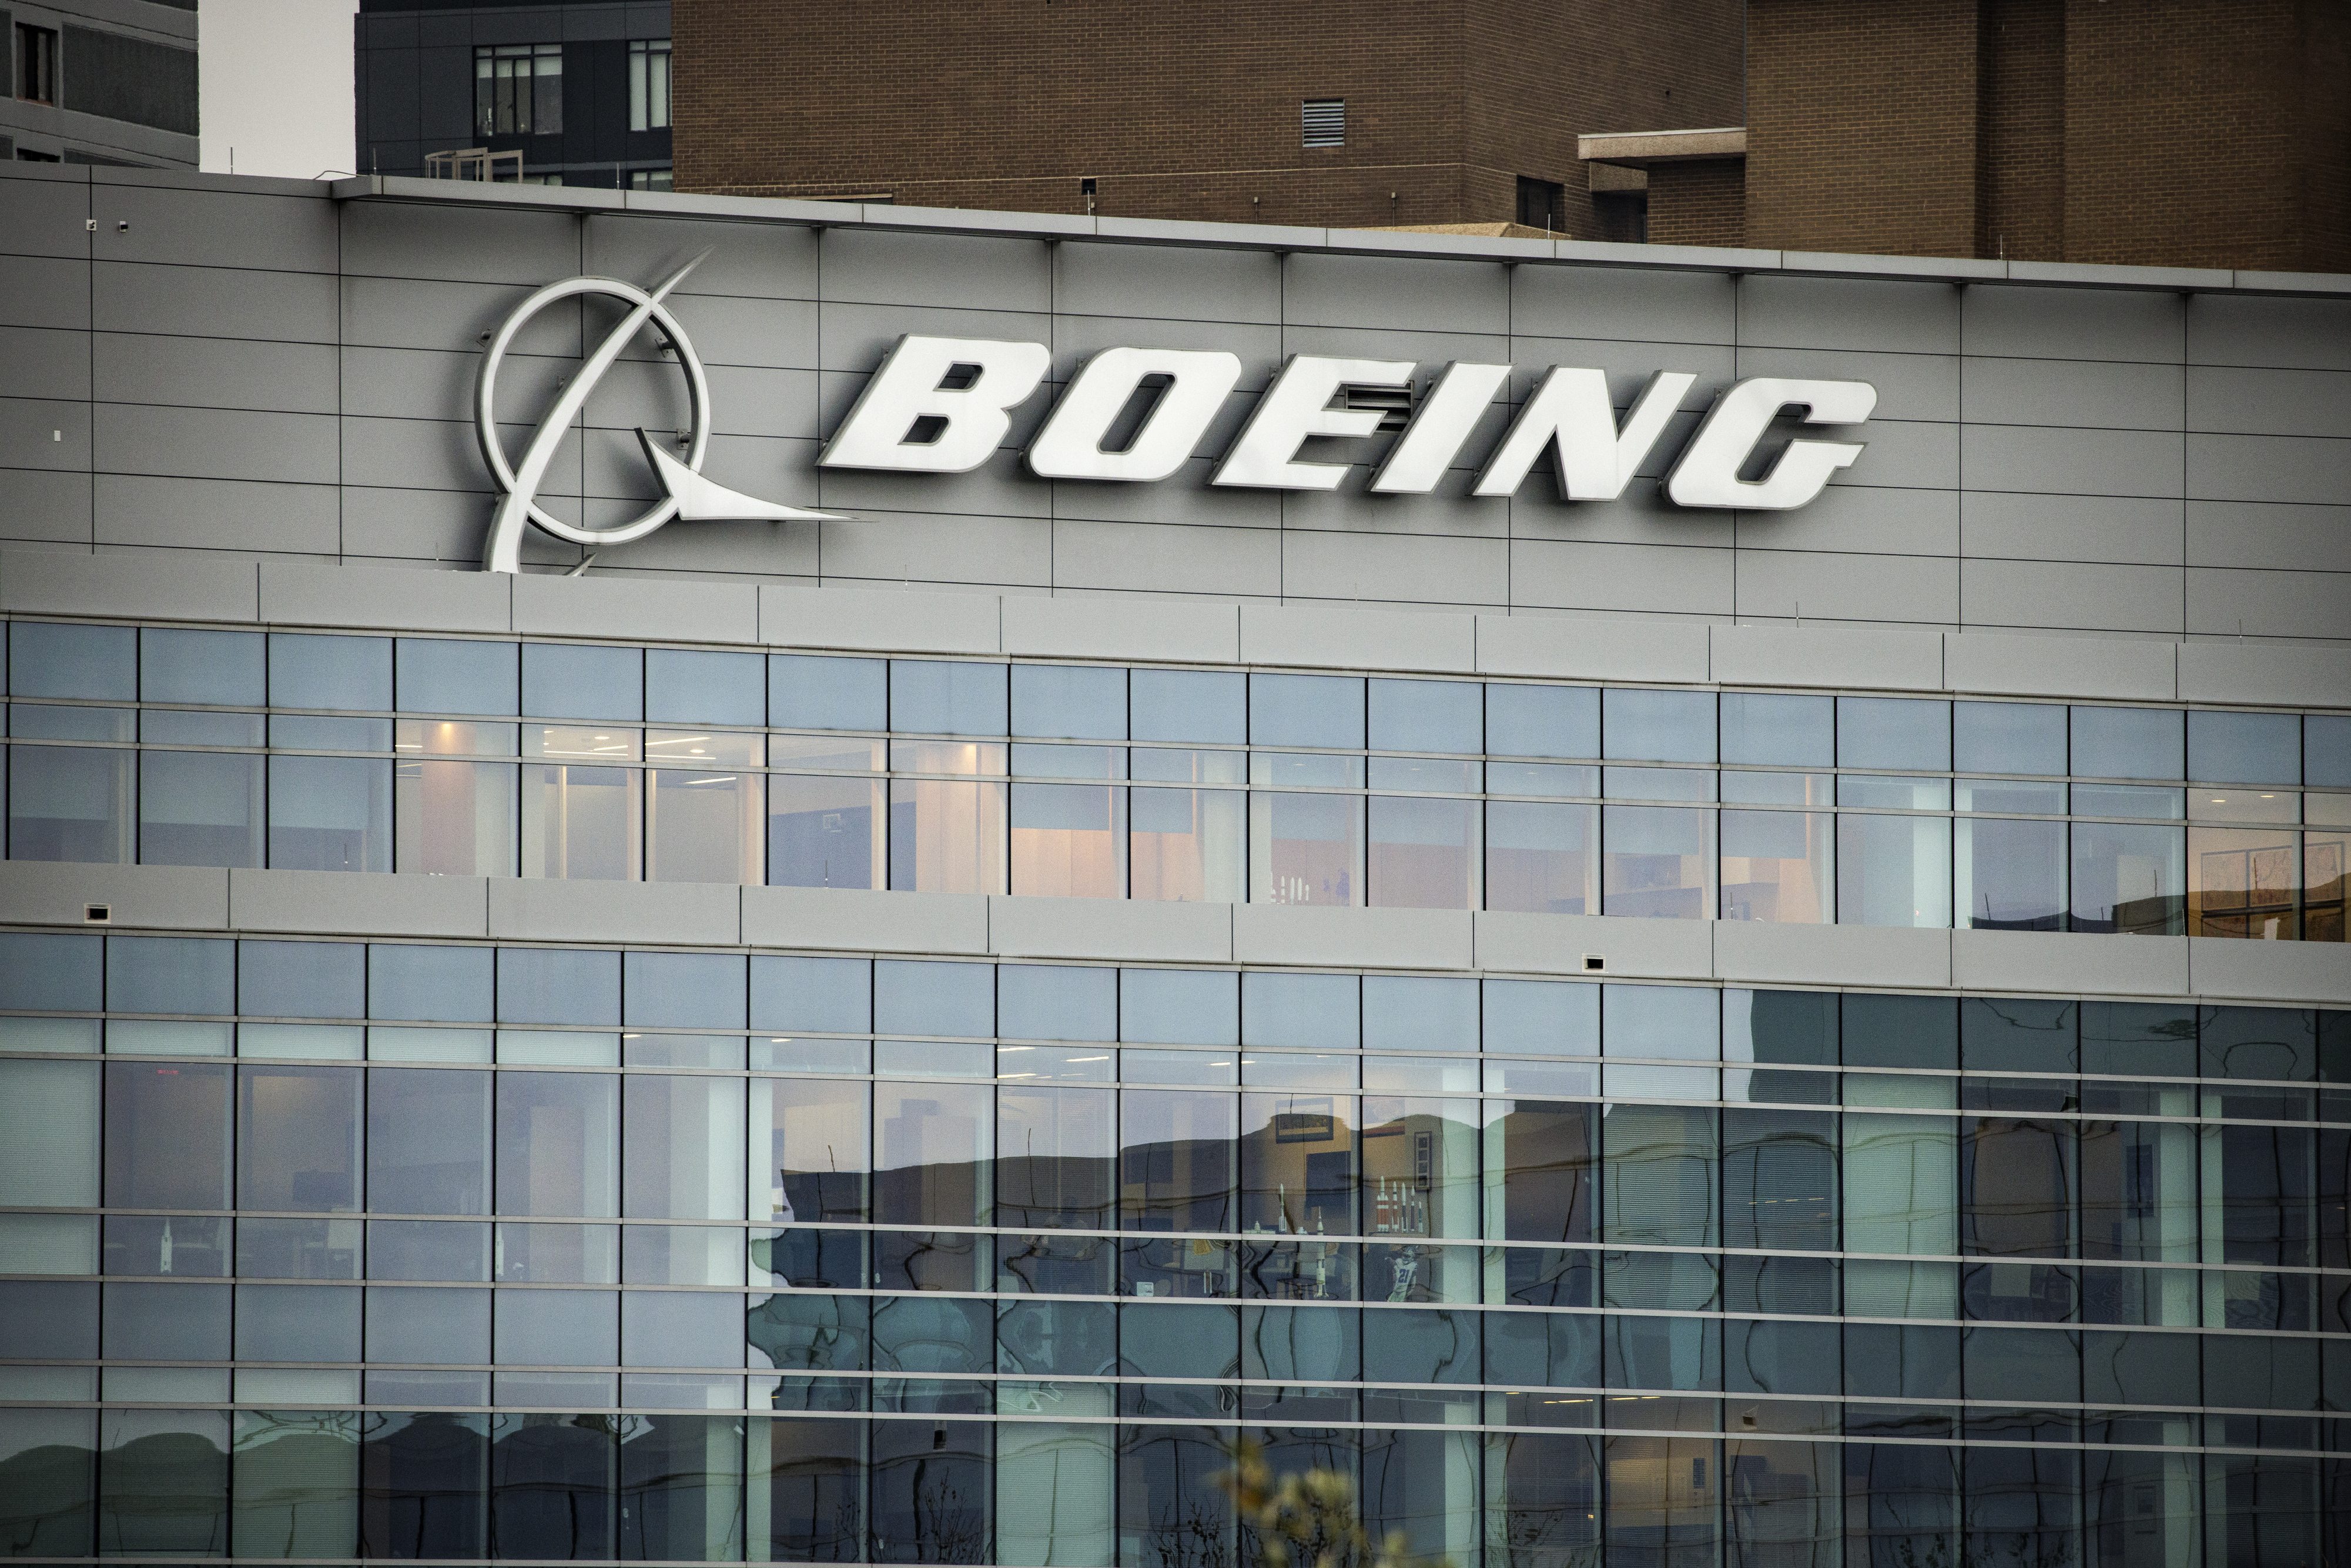 Boeing logo on the exterior of a corporate building with reflective windows